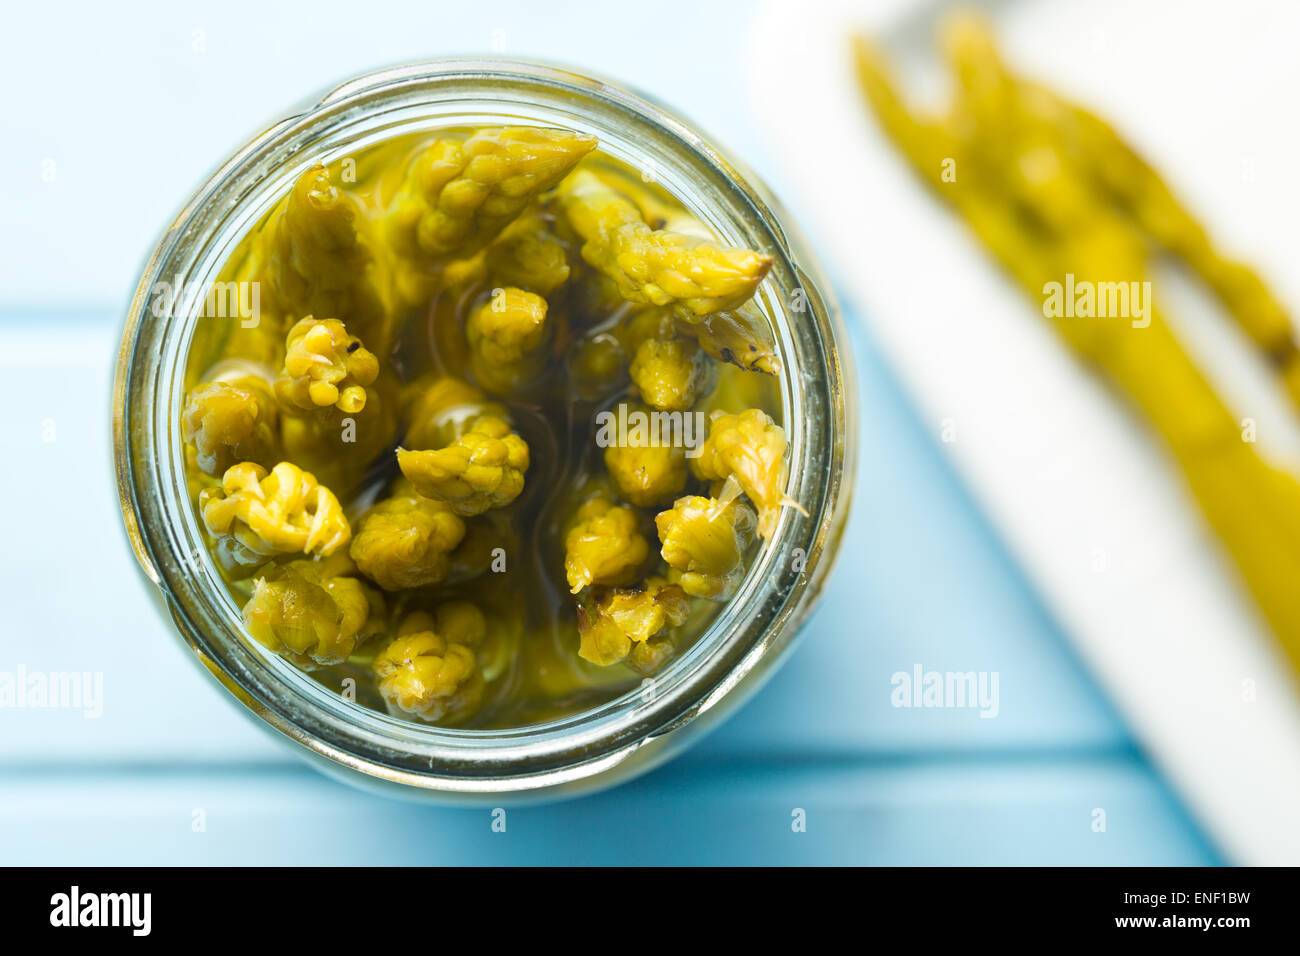 pickled asparagus on kitchen table Stock Photo